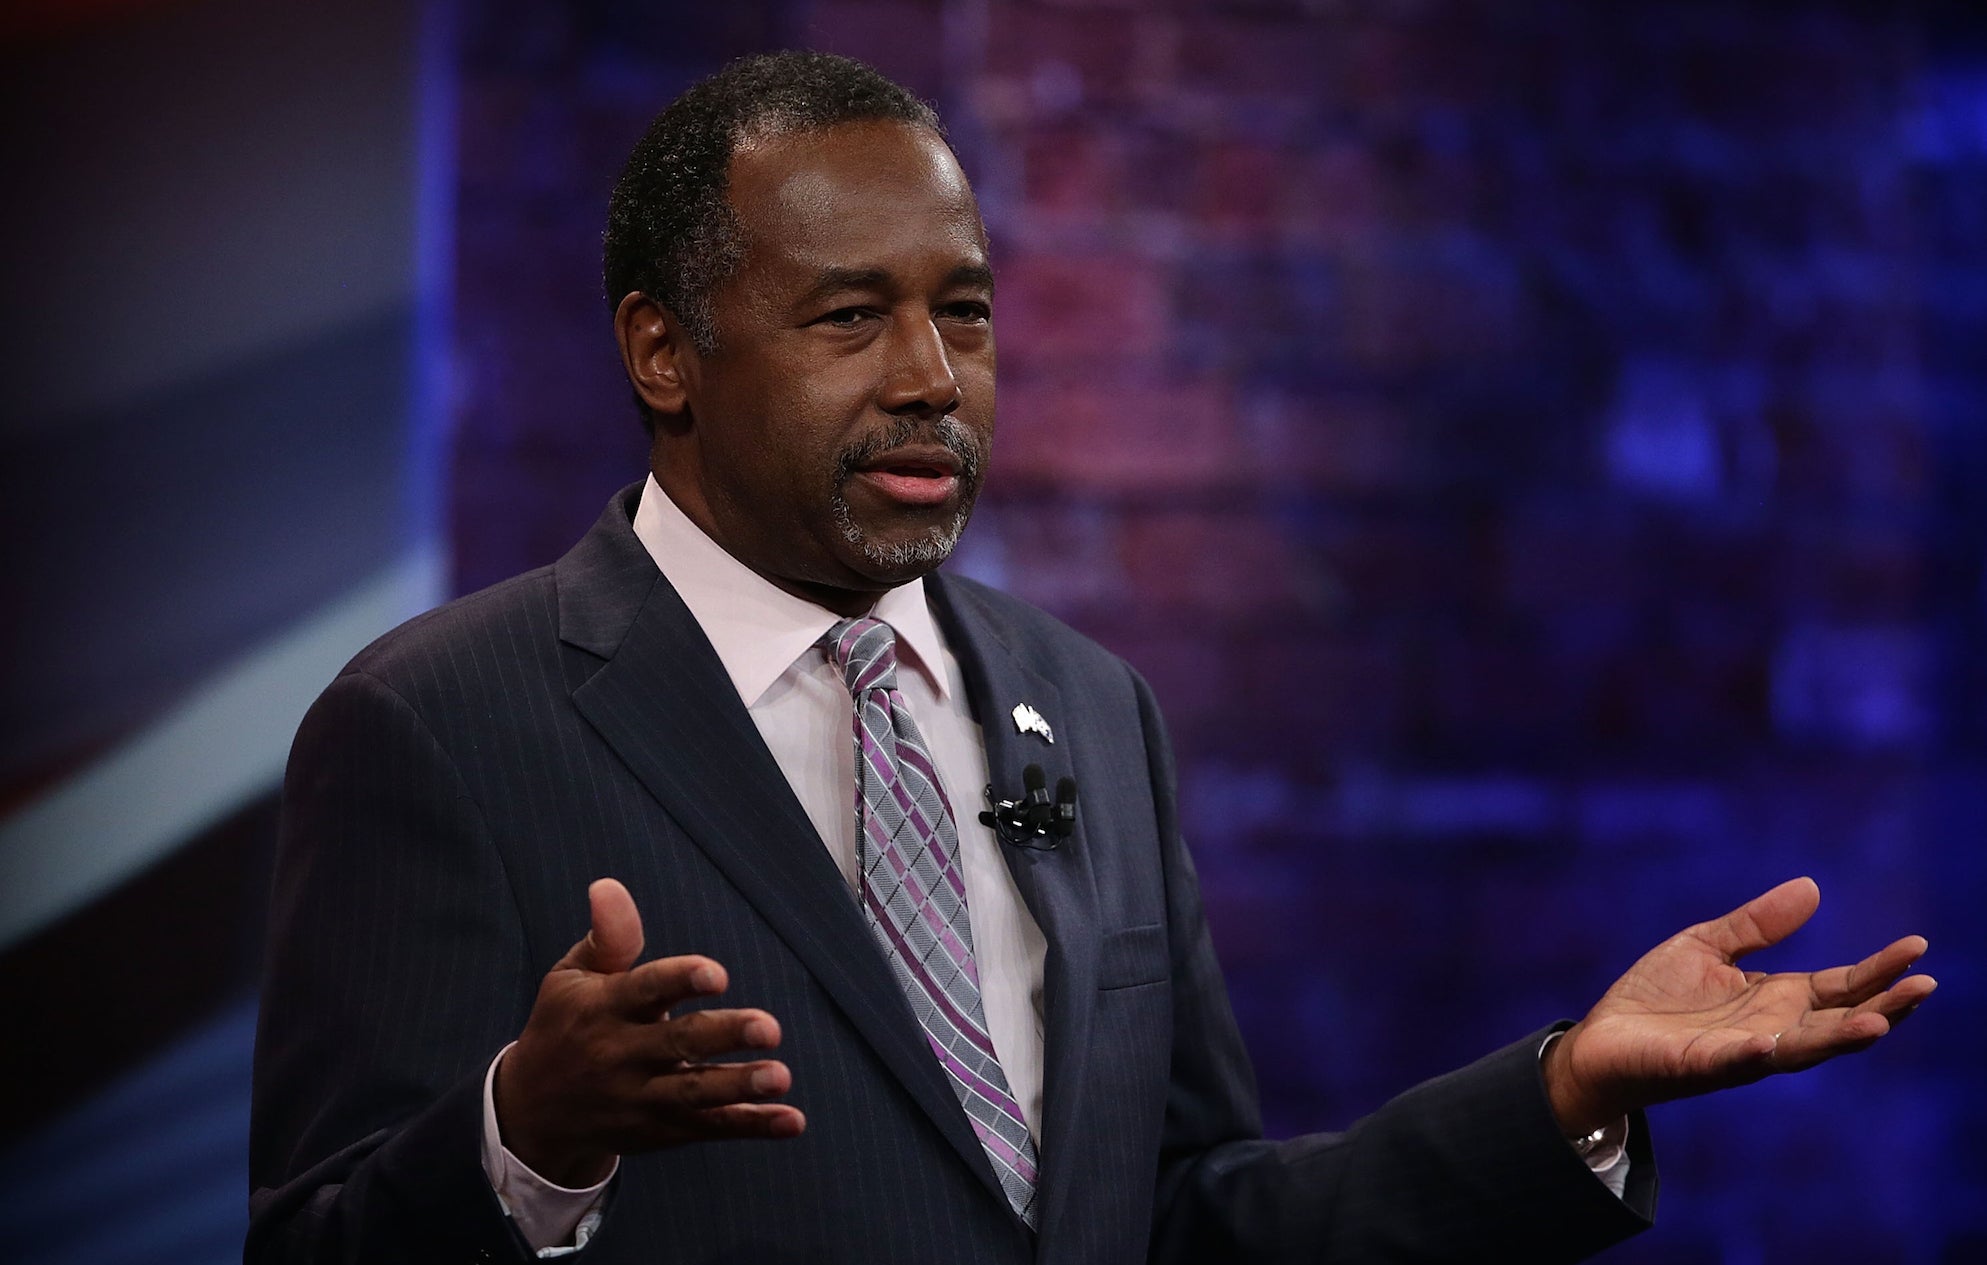 Ben Carson doesn't think Barack Obama understands the black experience.